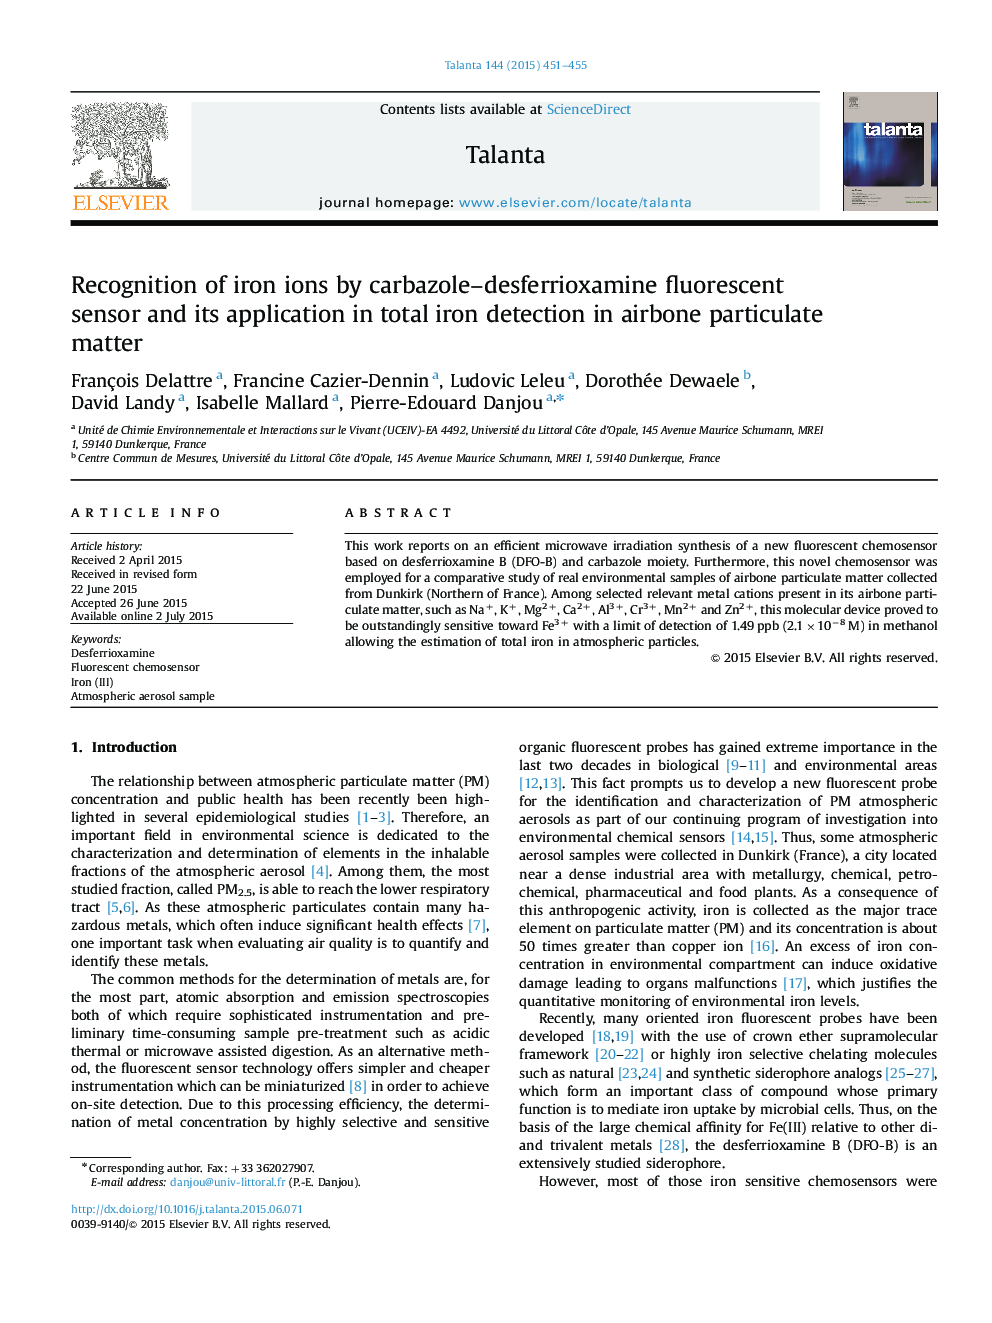 Recognition of iron ions by carbazole-desferrioxamine fluorescent sensor and its application in total iron detection in airbone particulate matter